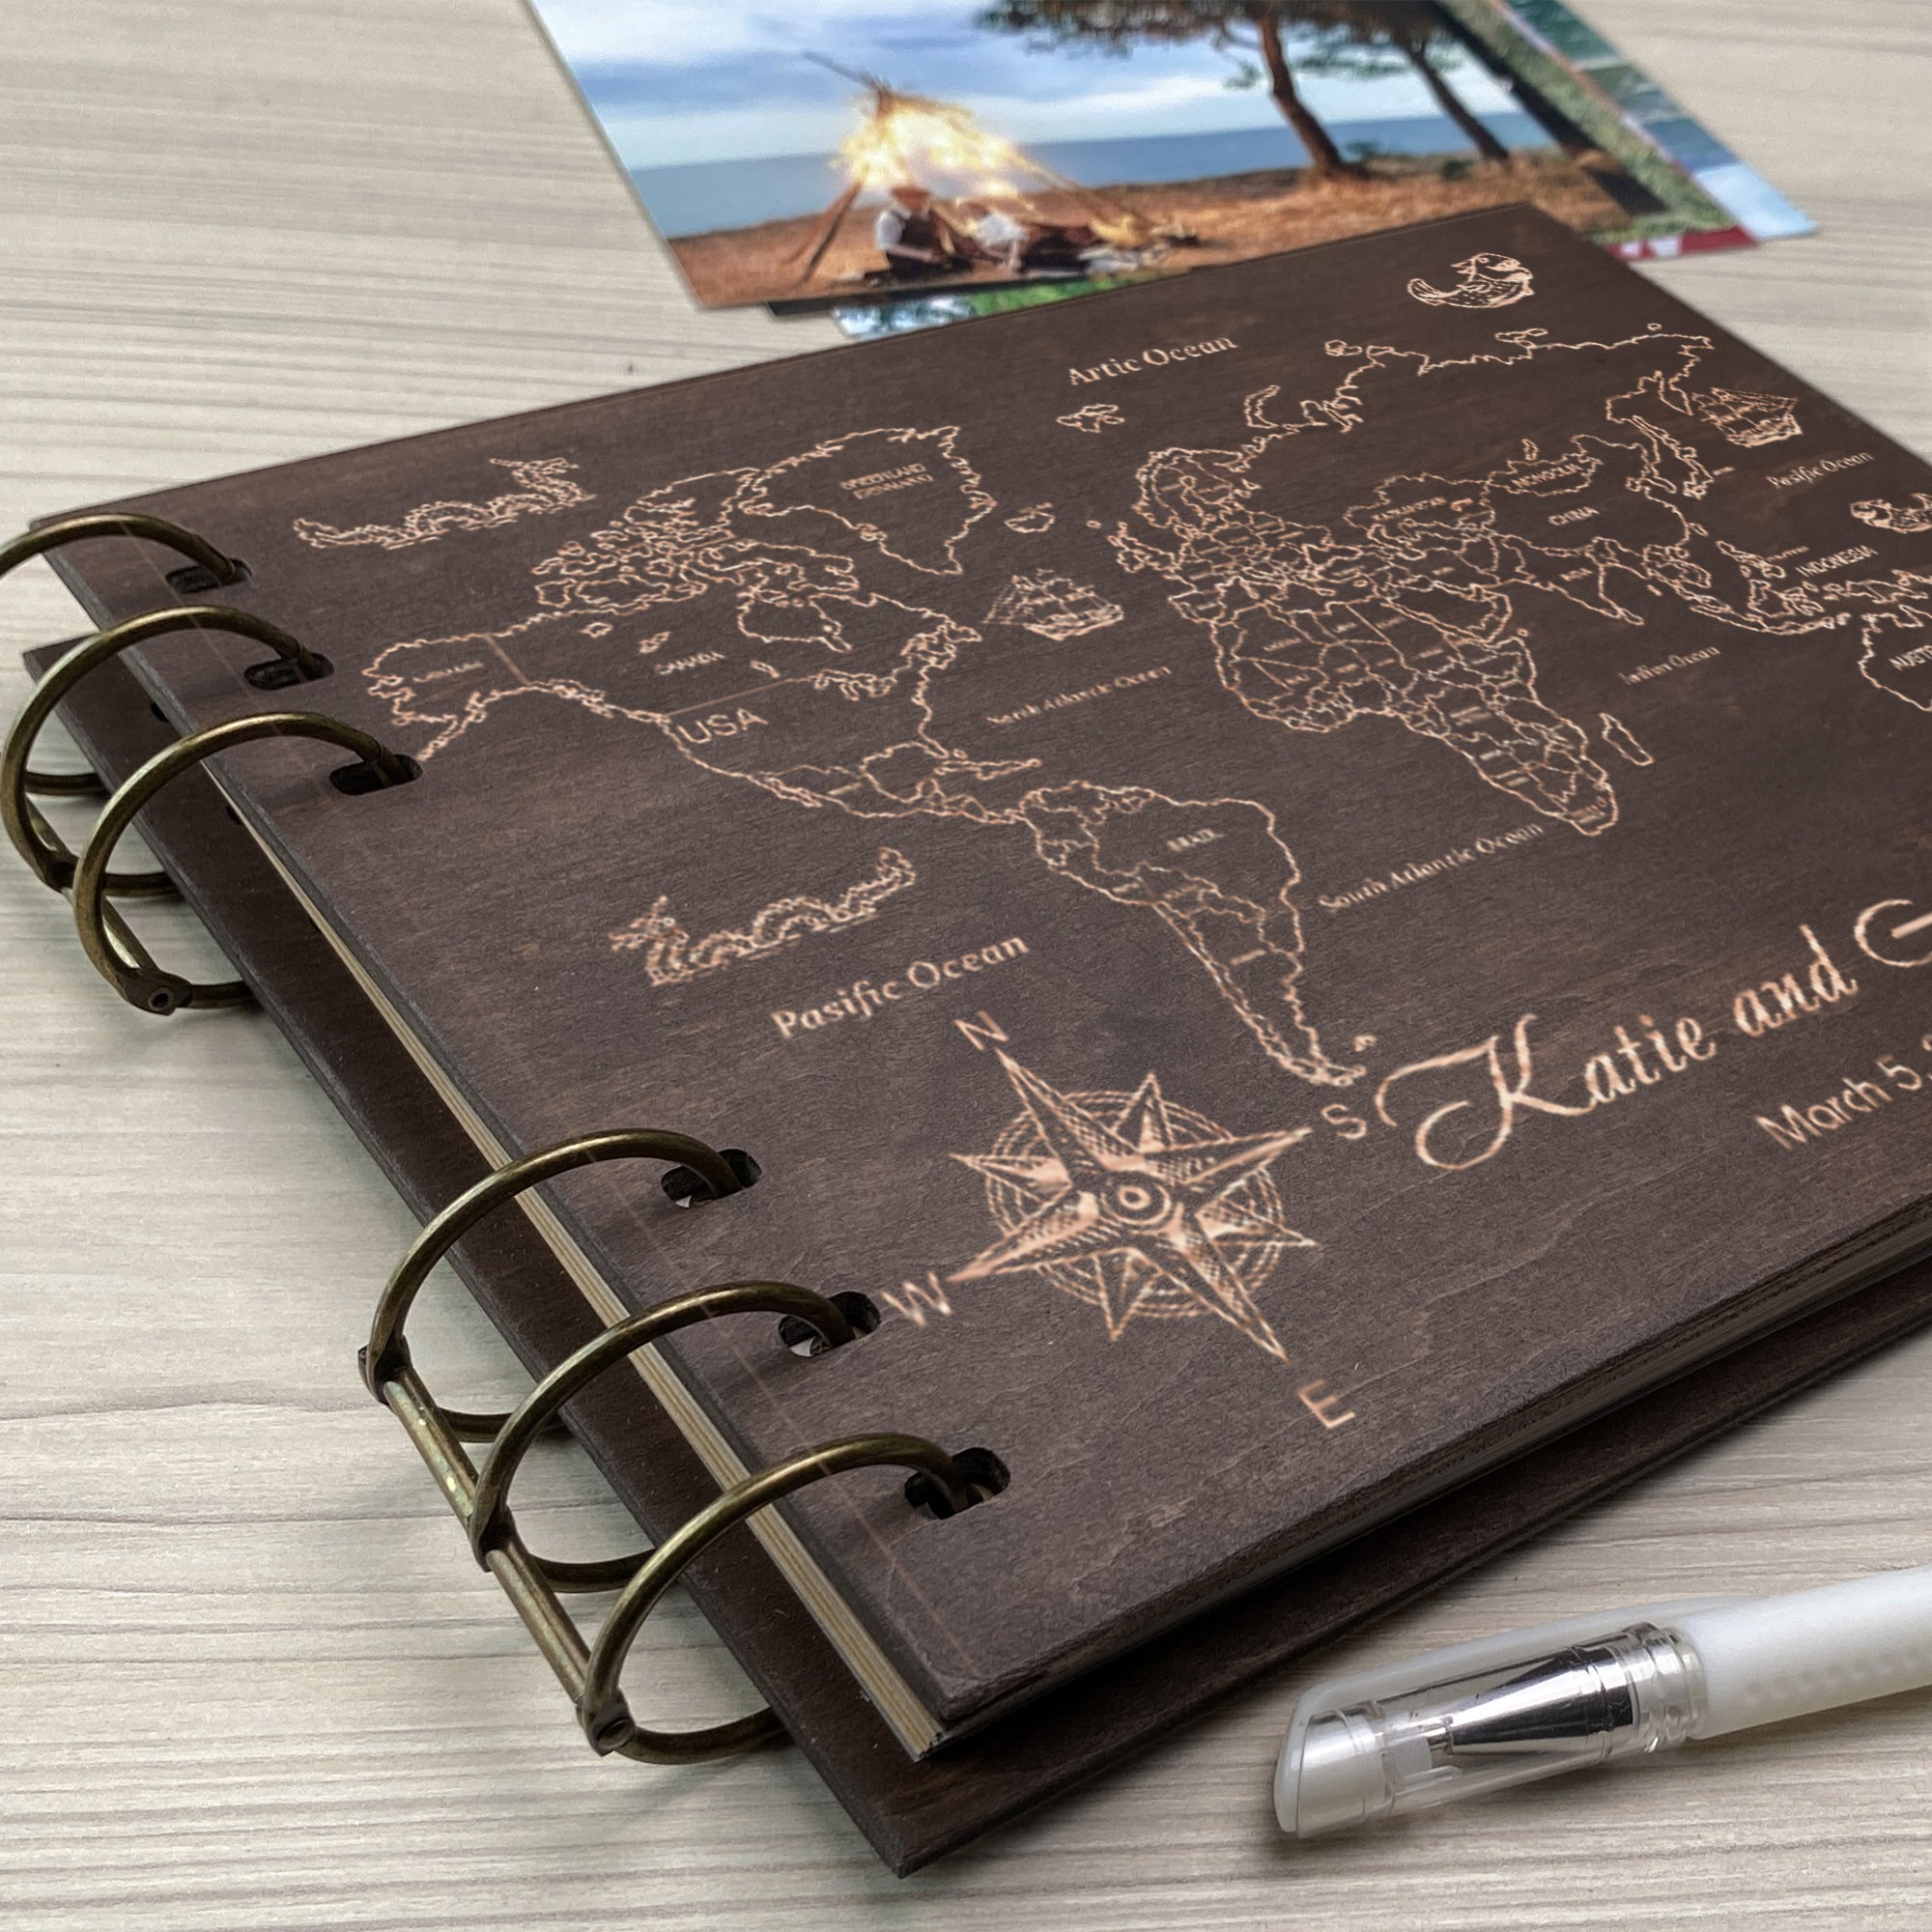 Personalized photo album cover and World map engraving